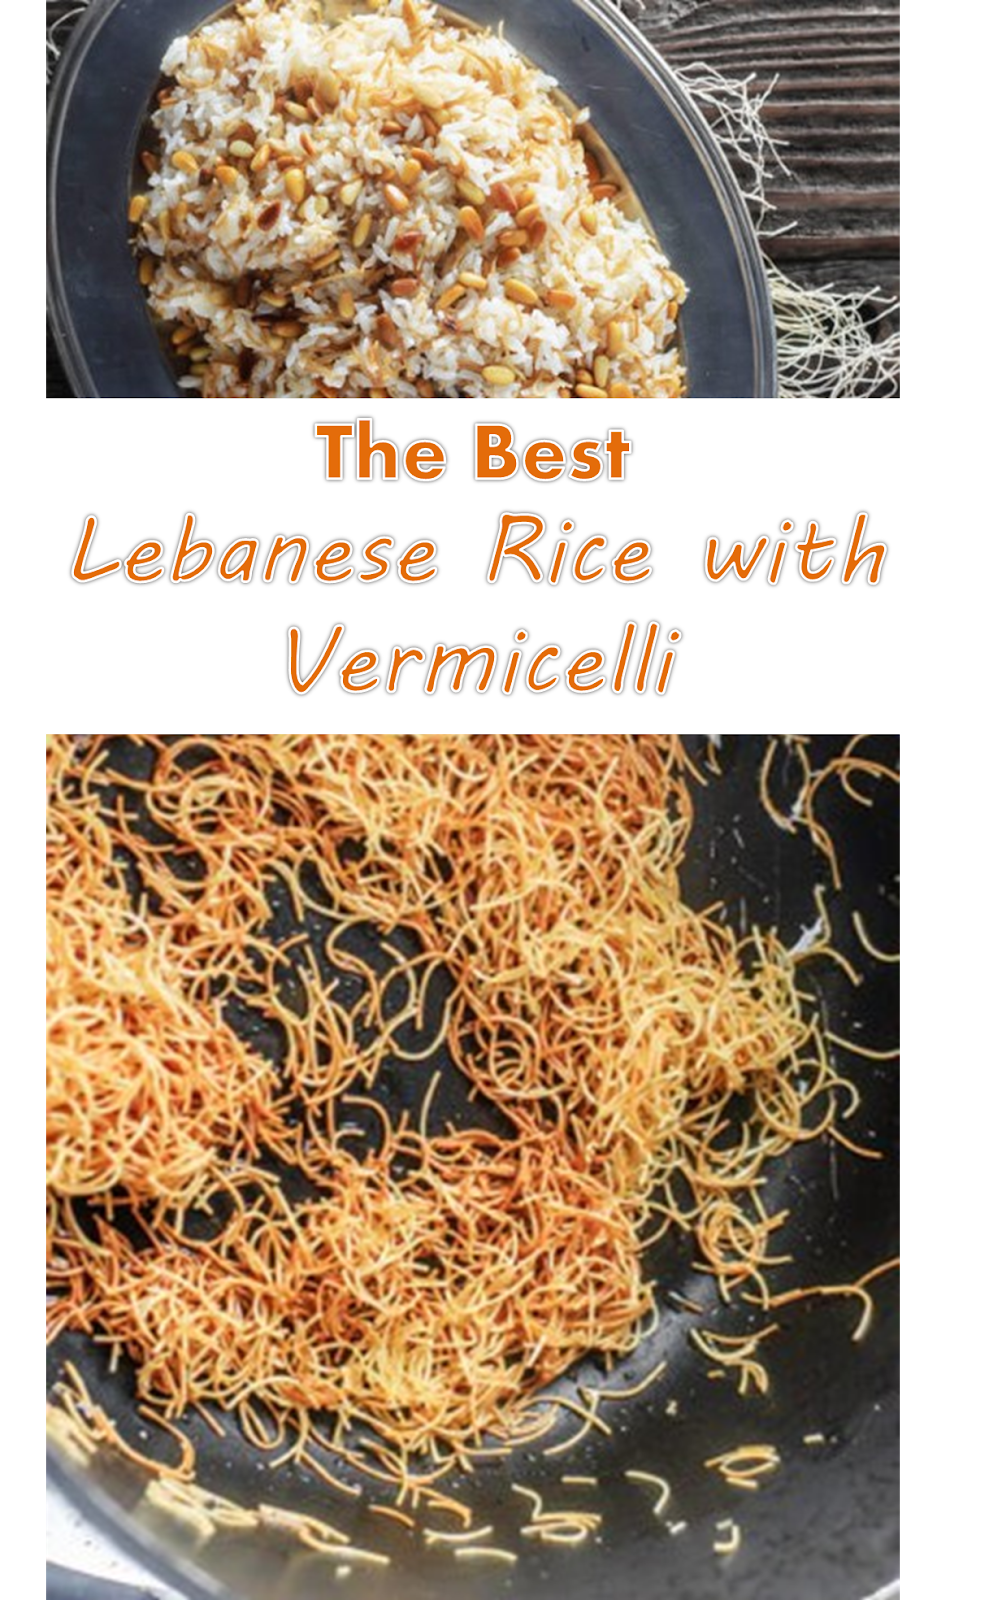 637 Reviews: #Best #Dish >> Lebanese #Rice with Vermicelli - ...